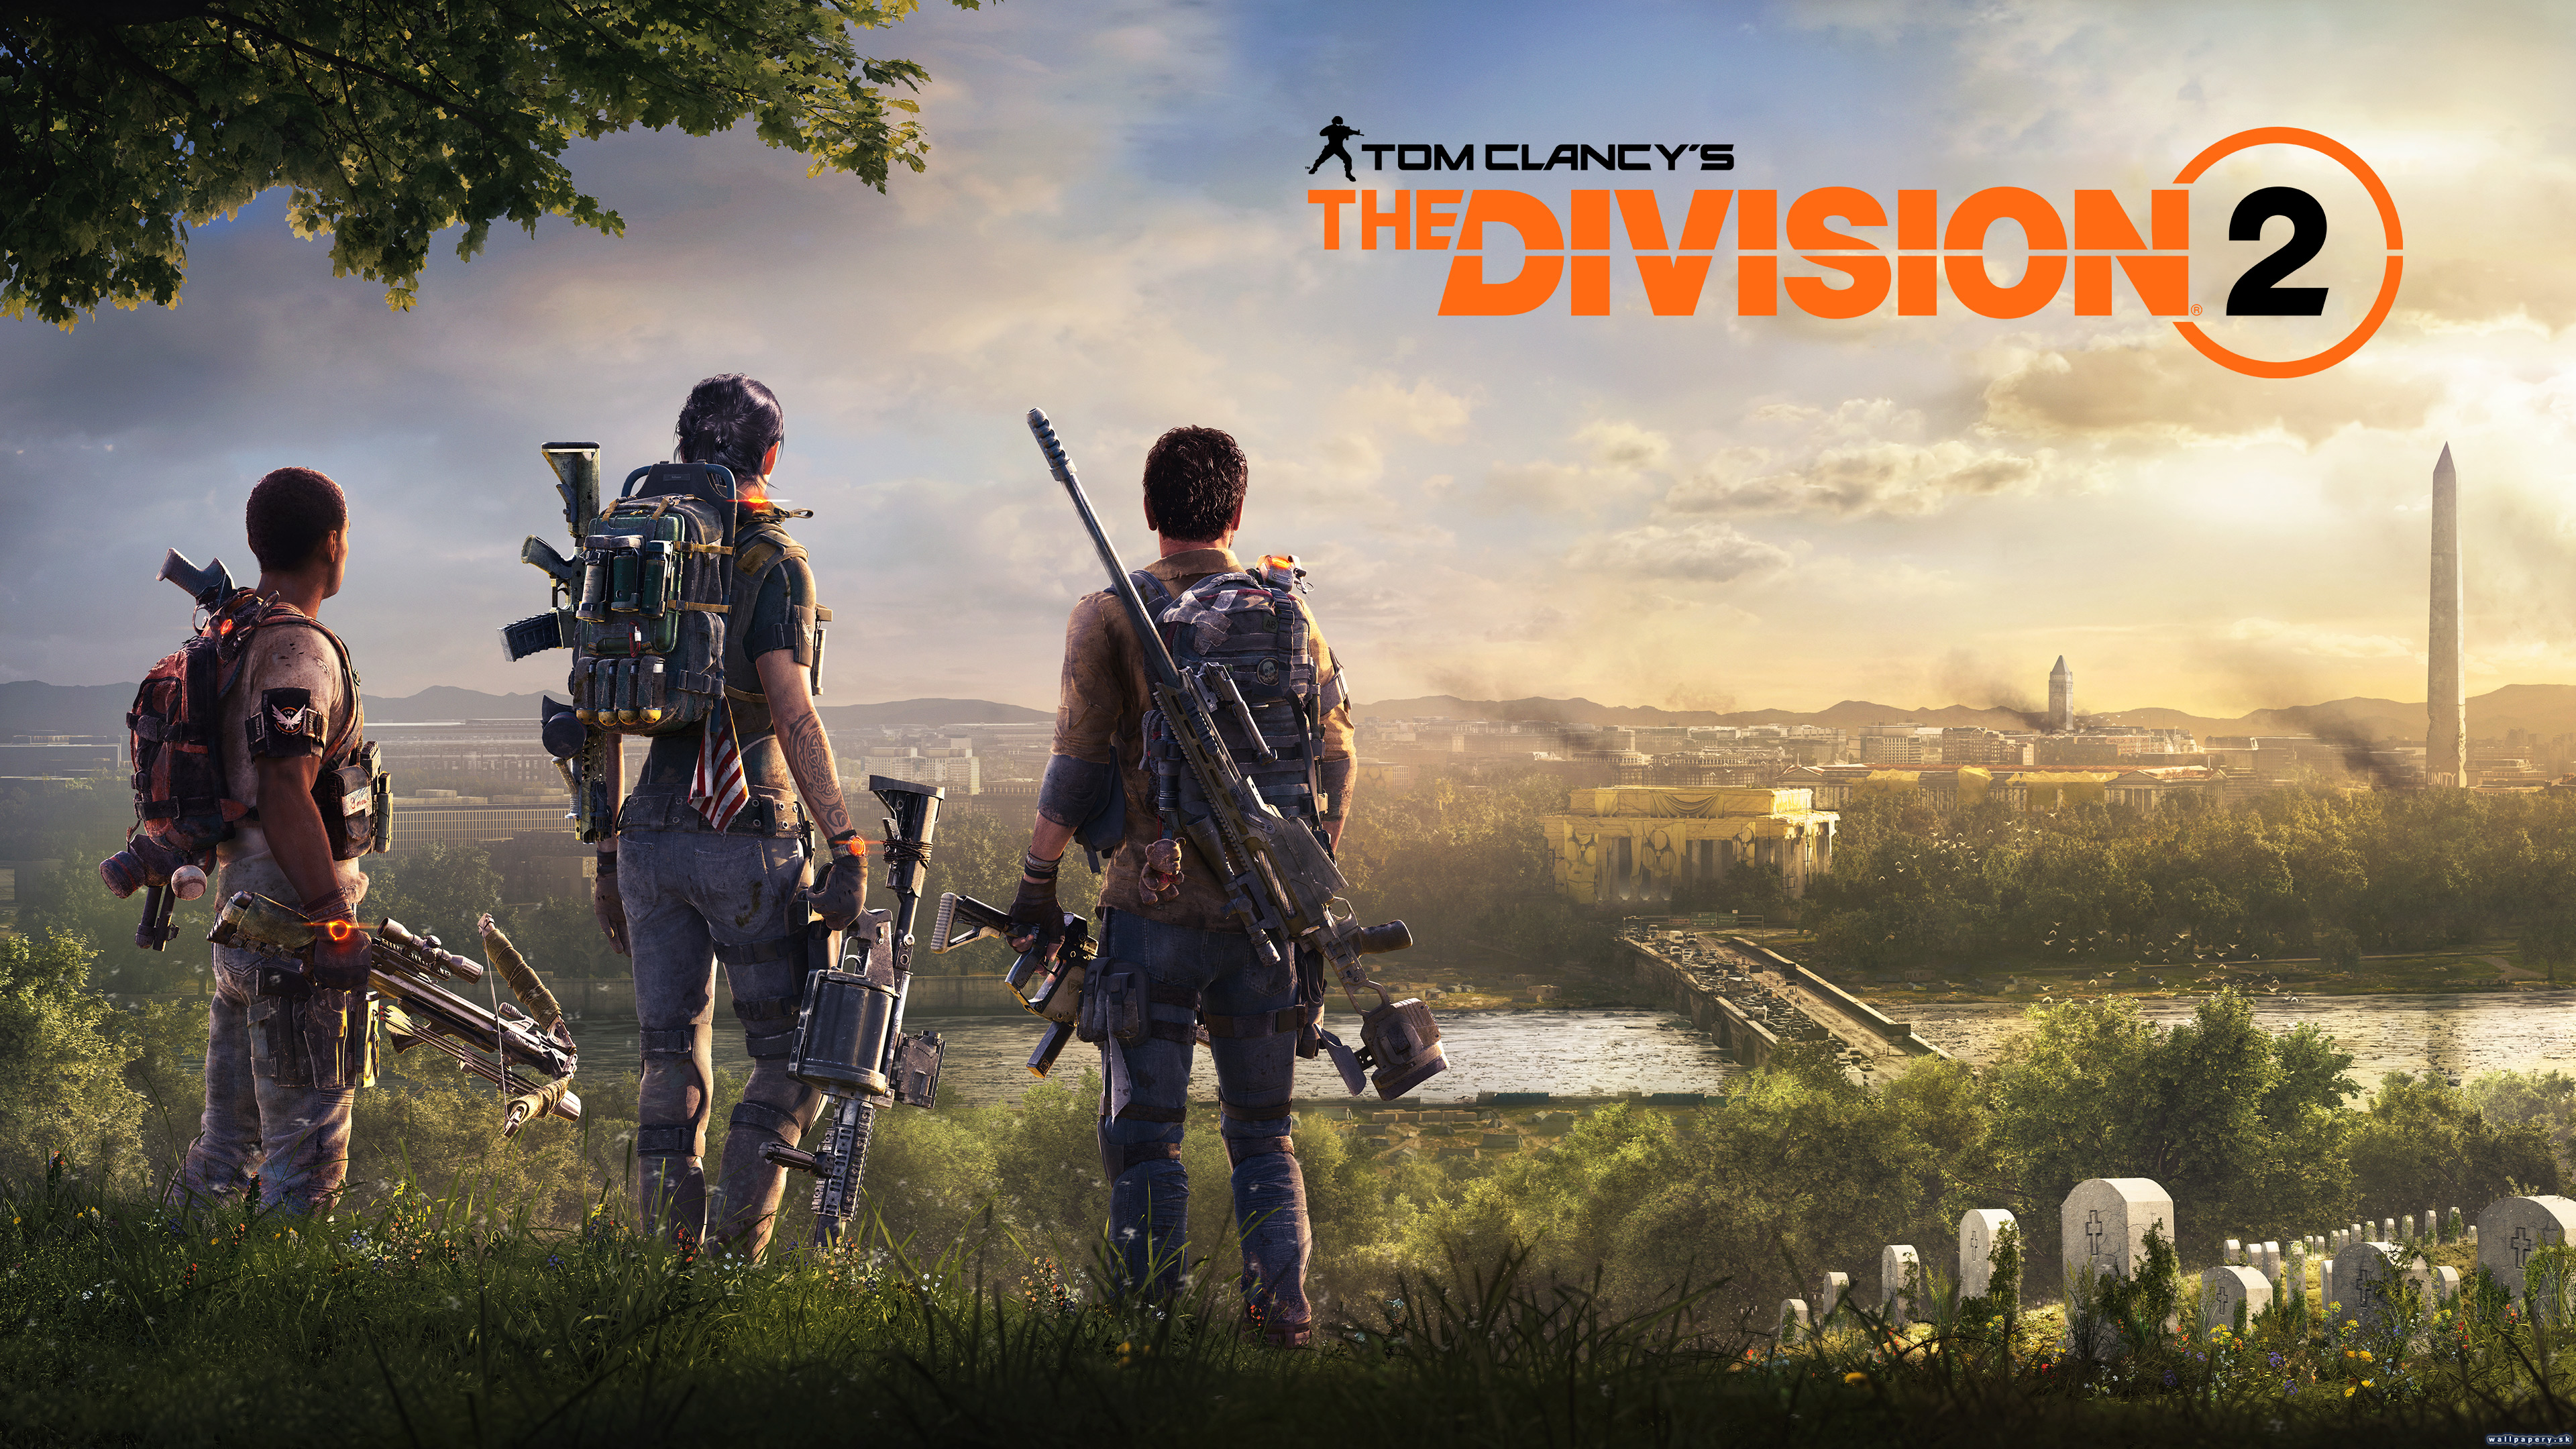 The Division 2 - wallpaper 2